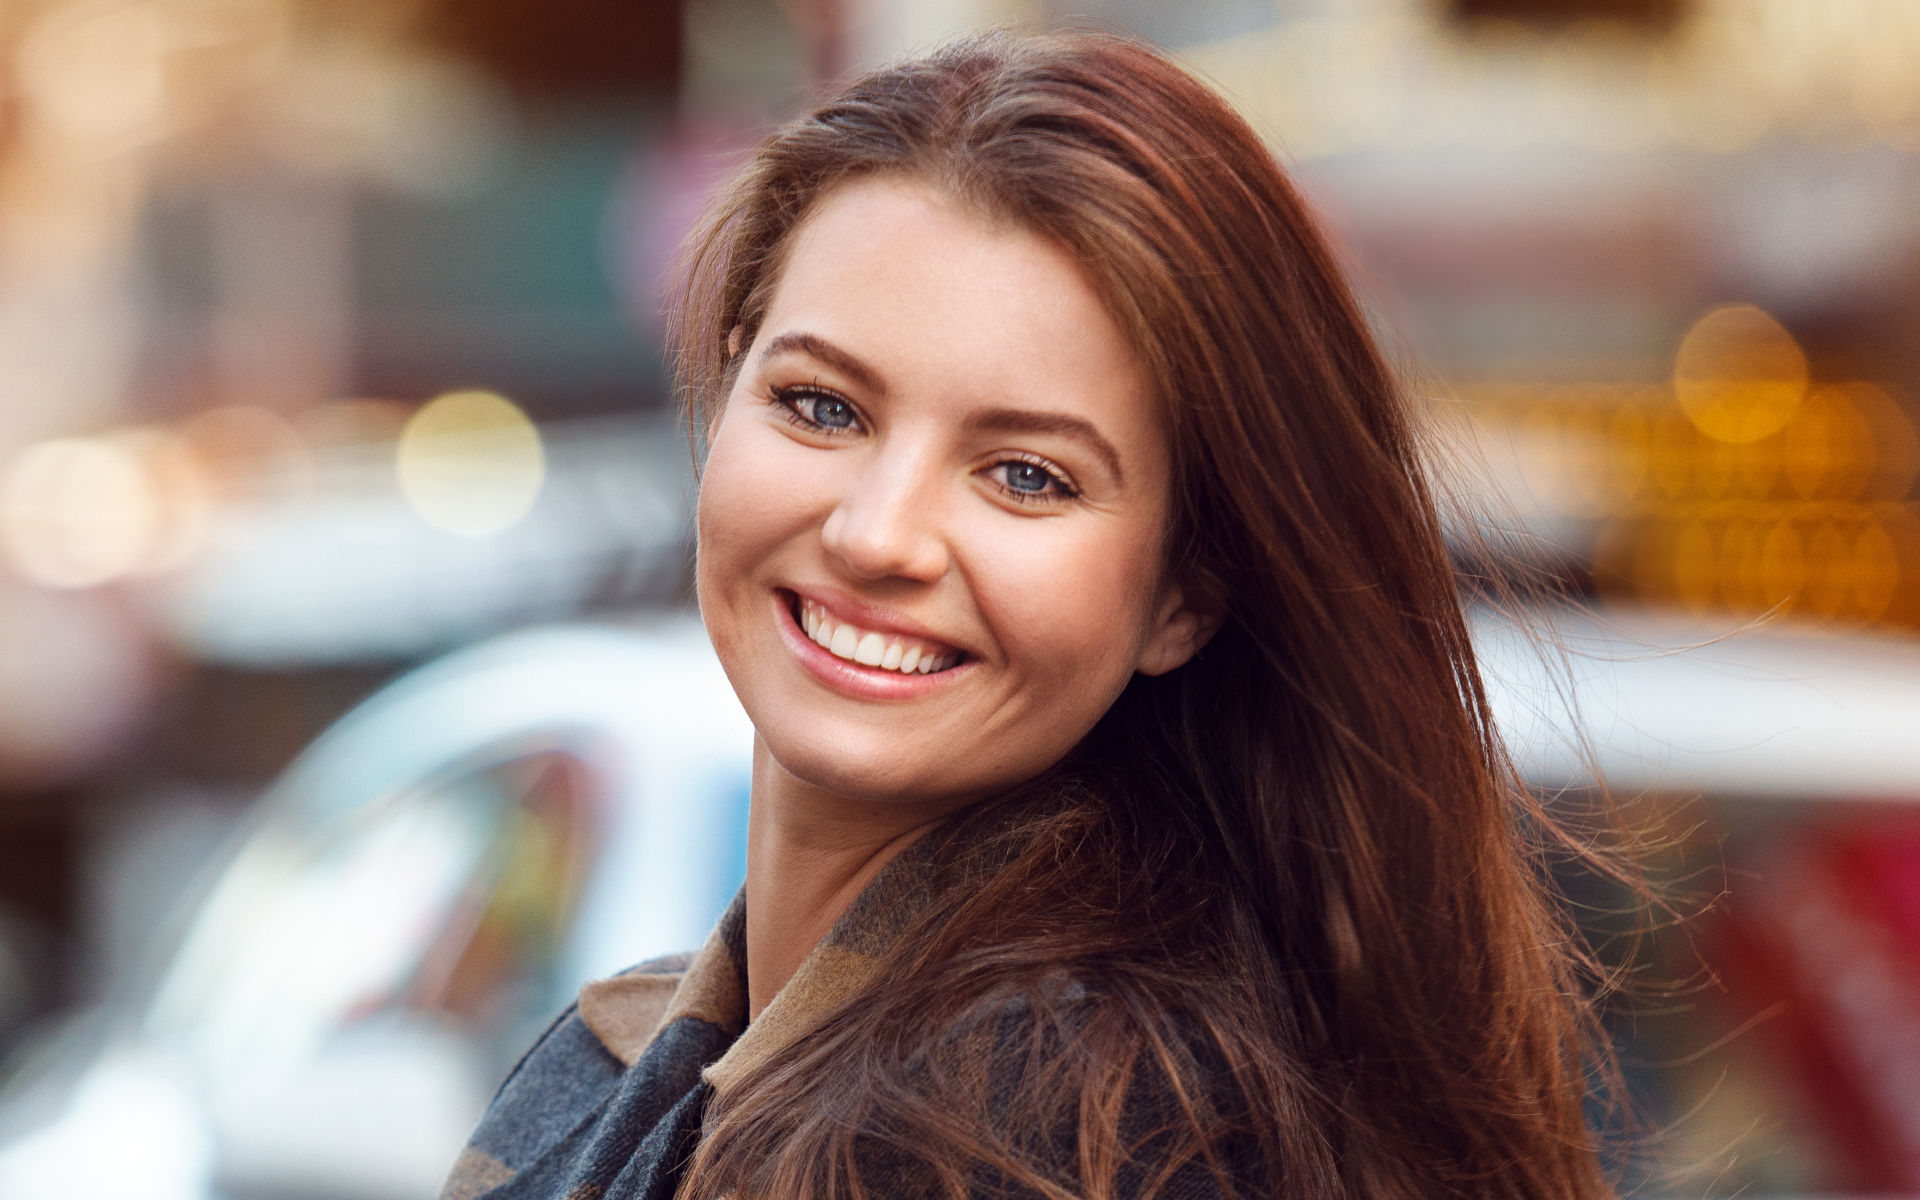 A young woman with perfect smile.